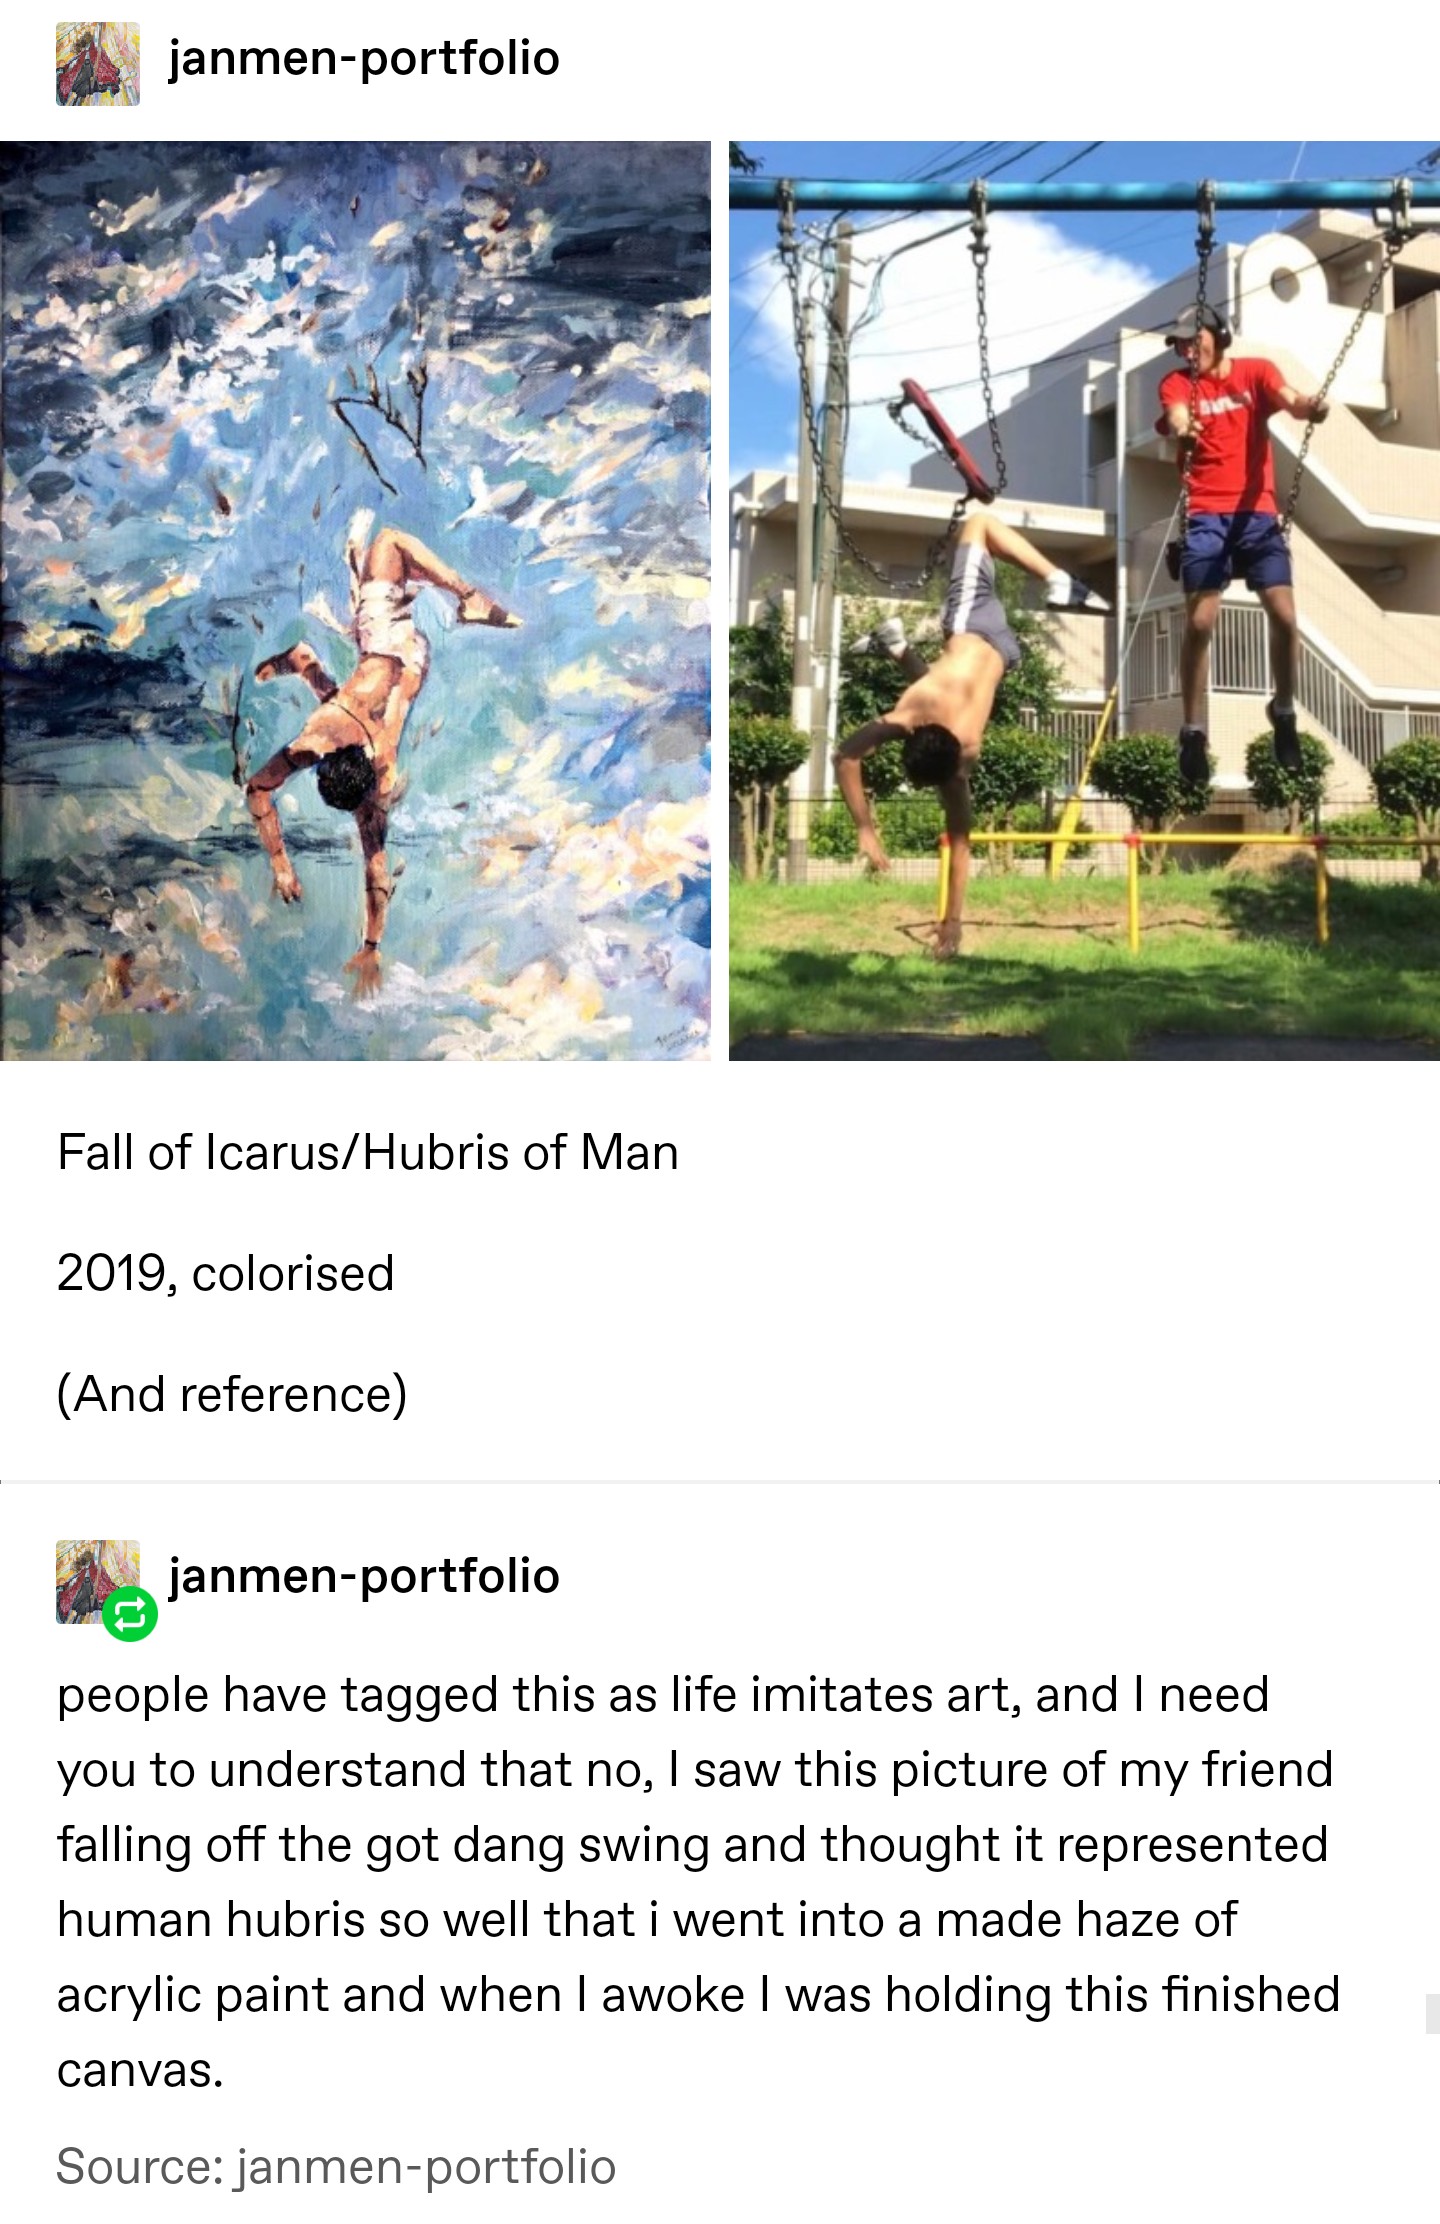 icarus life imitates art - janmenportfolio Fall of IcarusHubris of Man 2019, colorised And reference janmenportfolio people have tagged this as life imitates art, and I need you to understand that no, I saw this picture of my friend falling off the got da